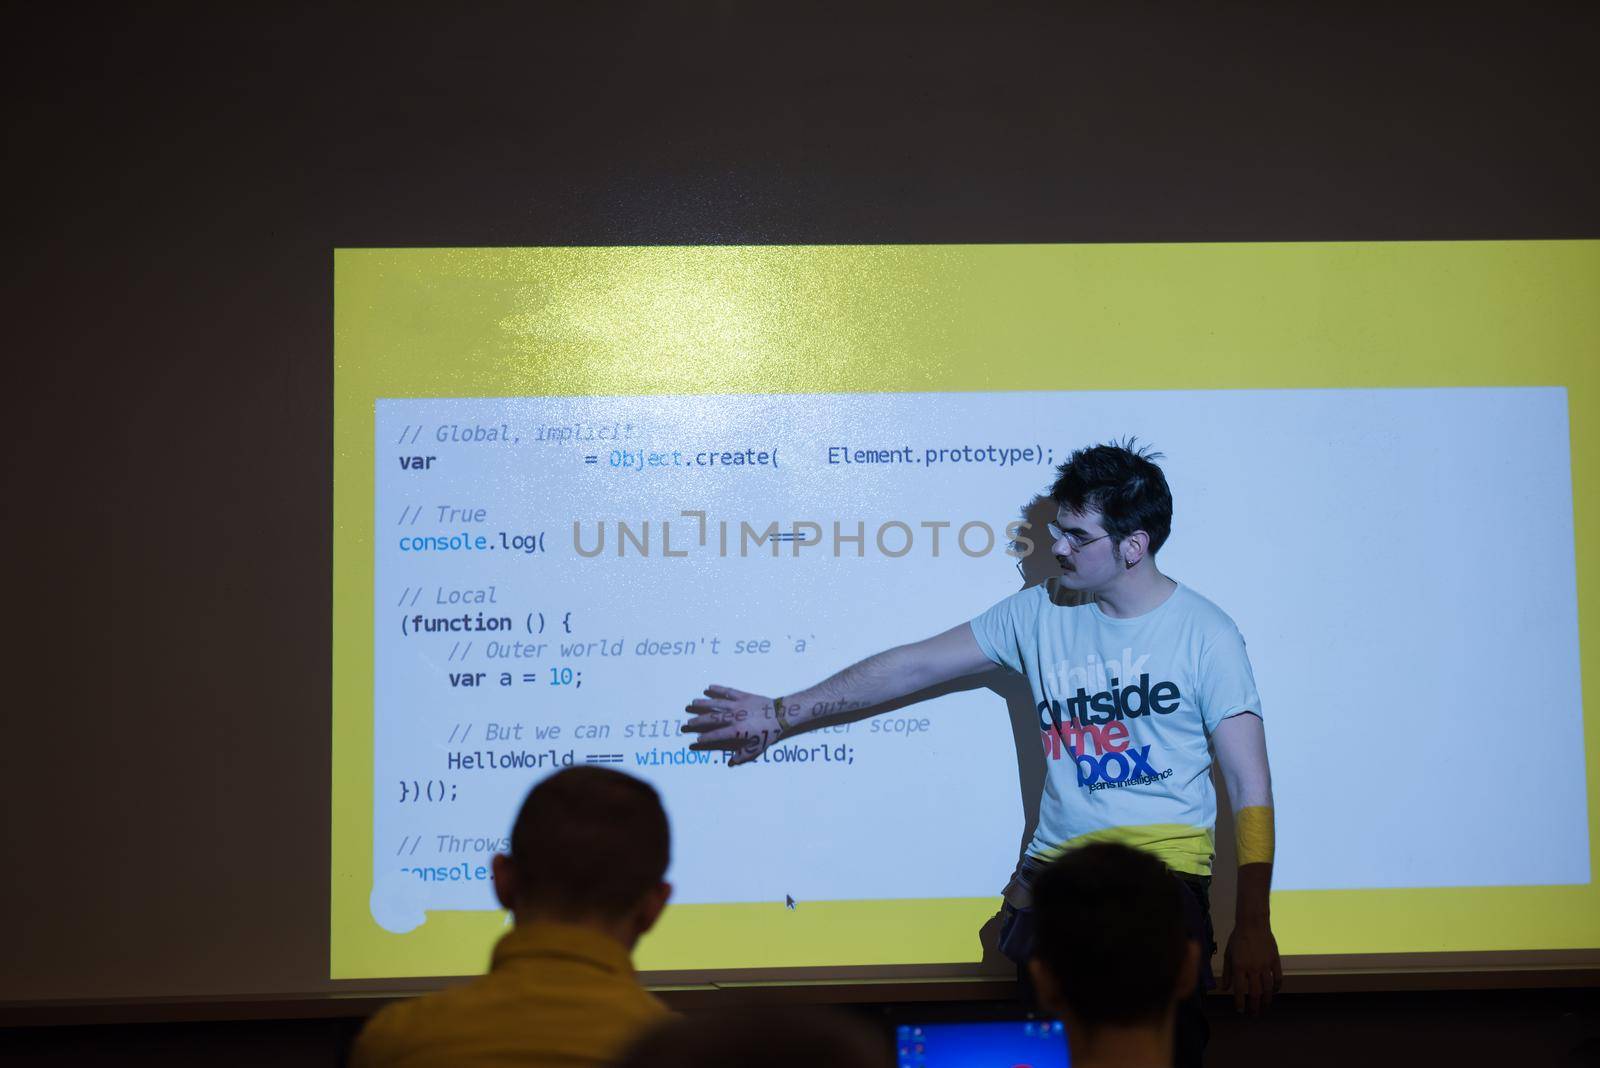 young computer technology students on  code programming class have presentation